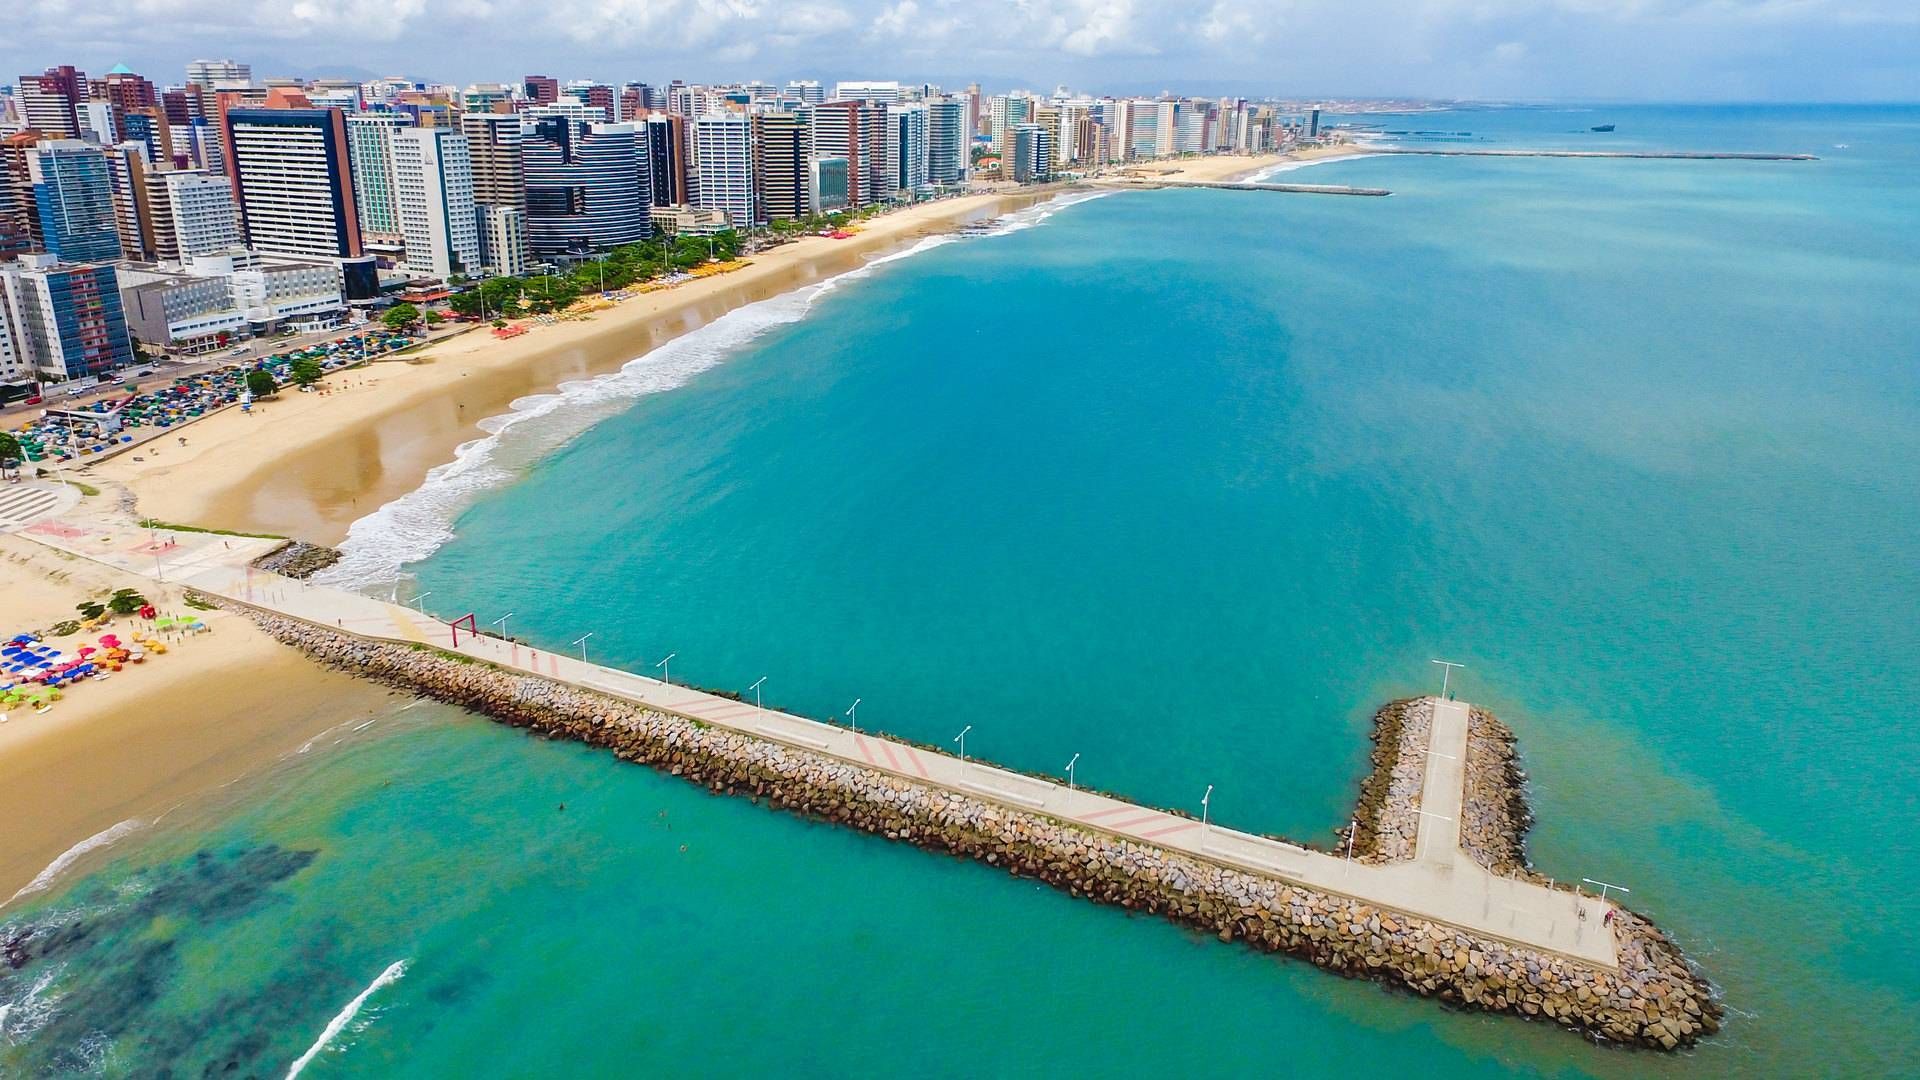 Top 5 locations to shoot in Fortaleza, Brazil